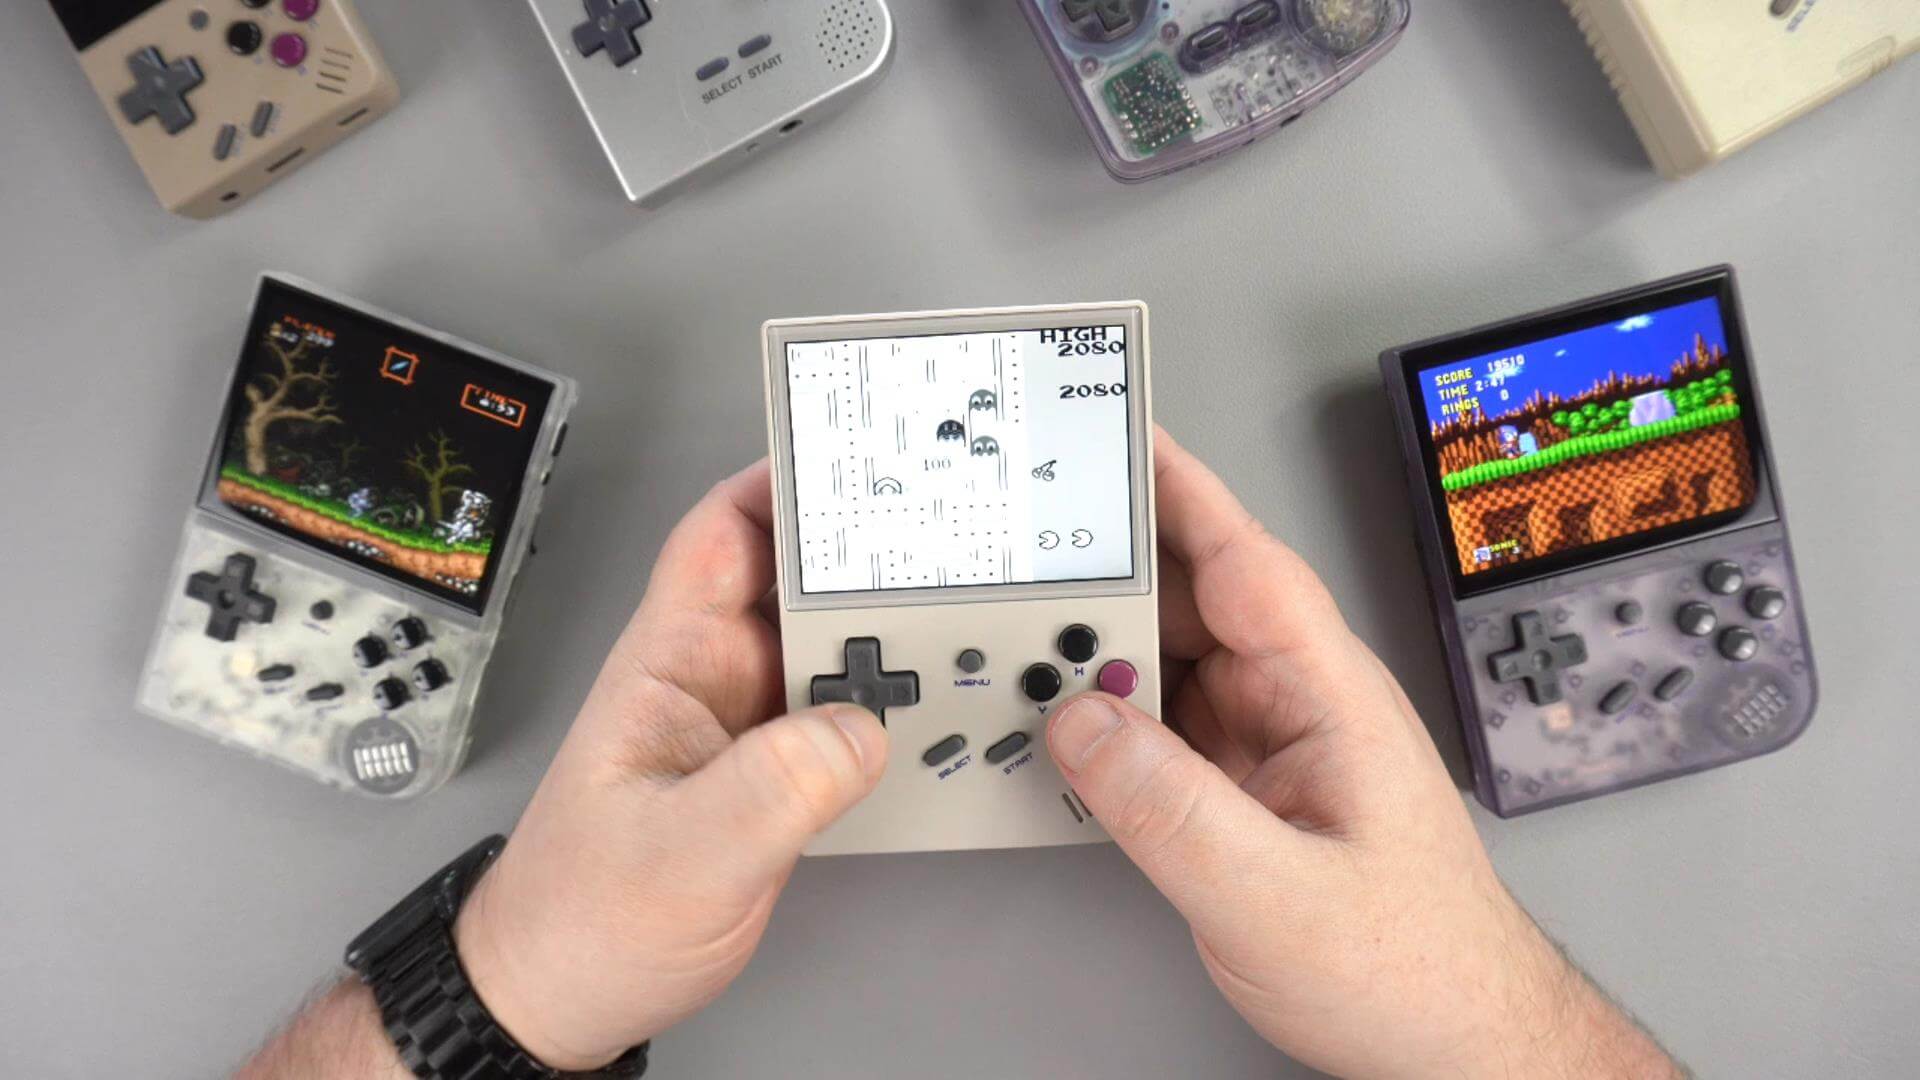 RG35XX Hands On, An All New Awesome Low-Cost Retro Emulation Handheld 